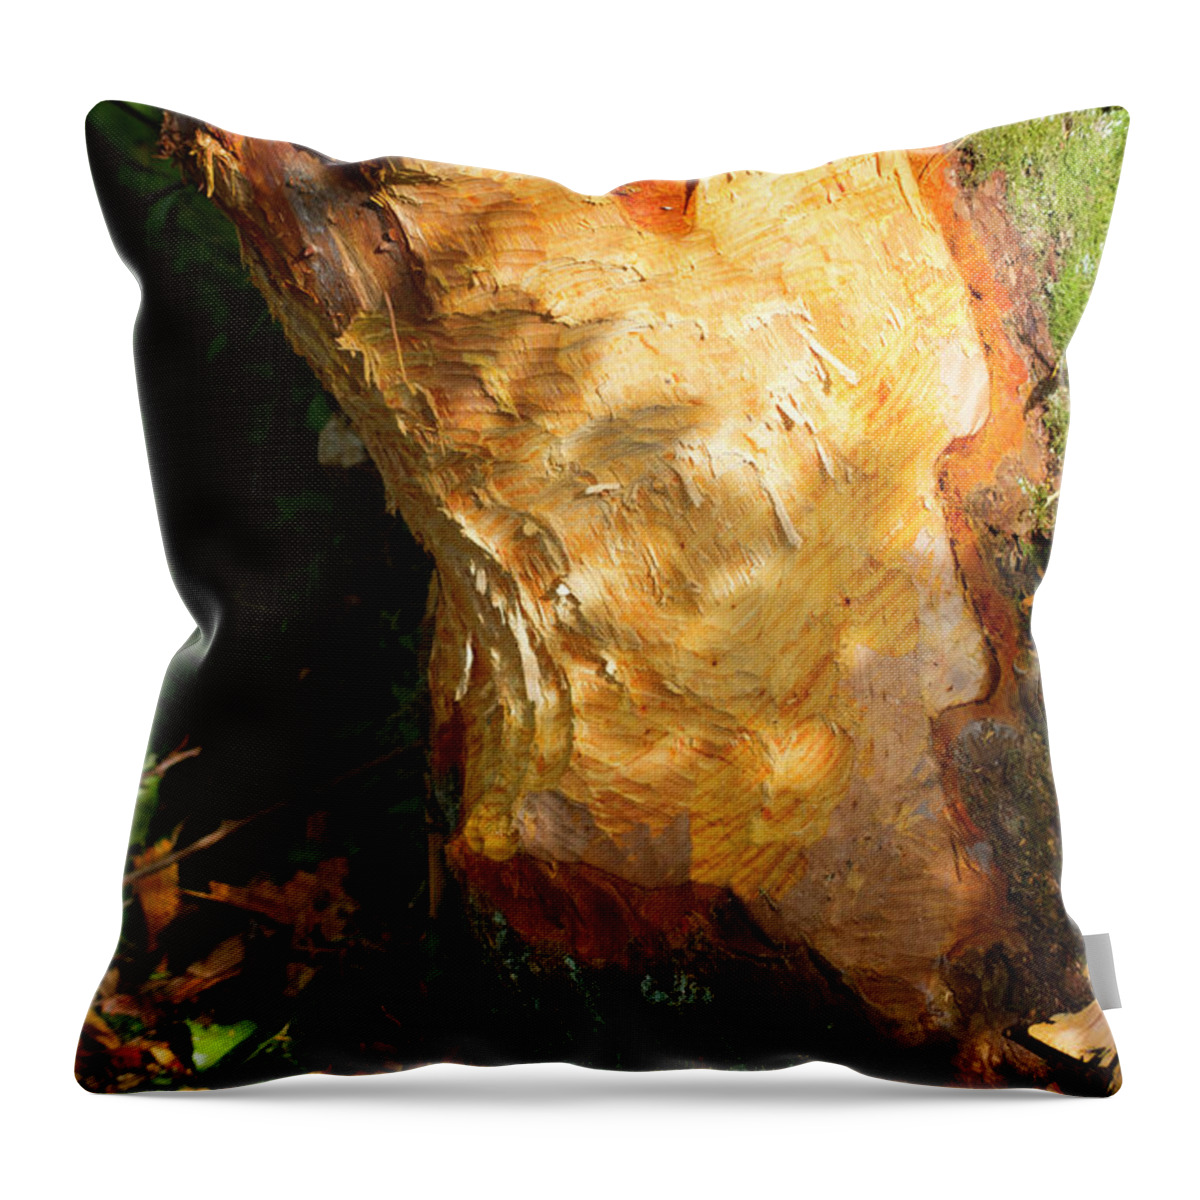 Plant Throw Pillow featuring the photograph Alder Tree Eaten At Its Base By Beaver Bevis Trust #3 by David Woodfall / Naturepl.com